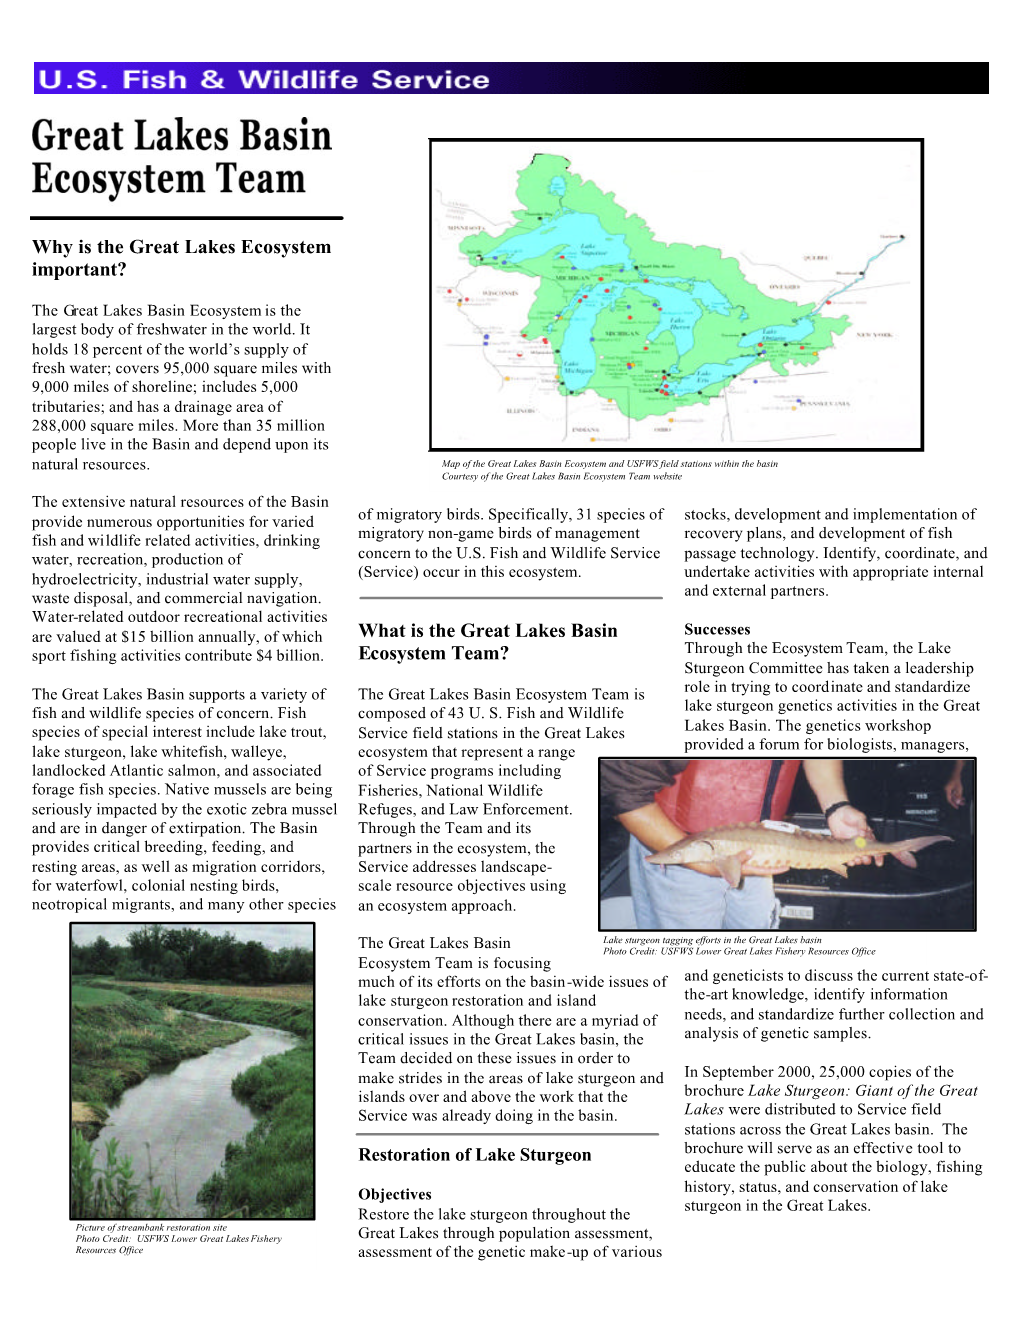 What Is the Great Lakes Basin Ecosystem Team?